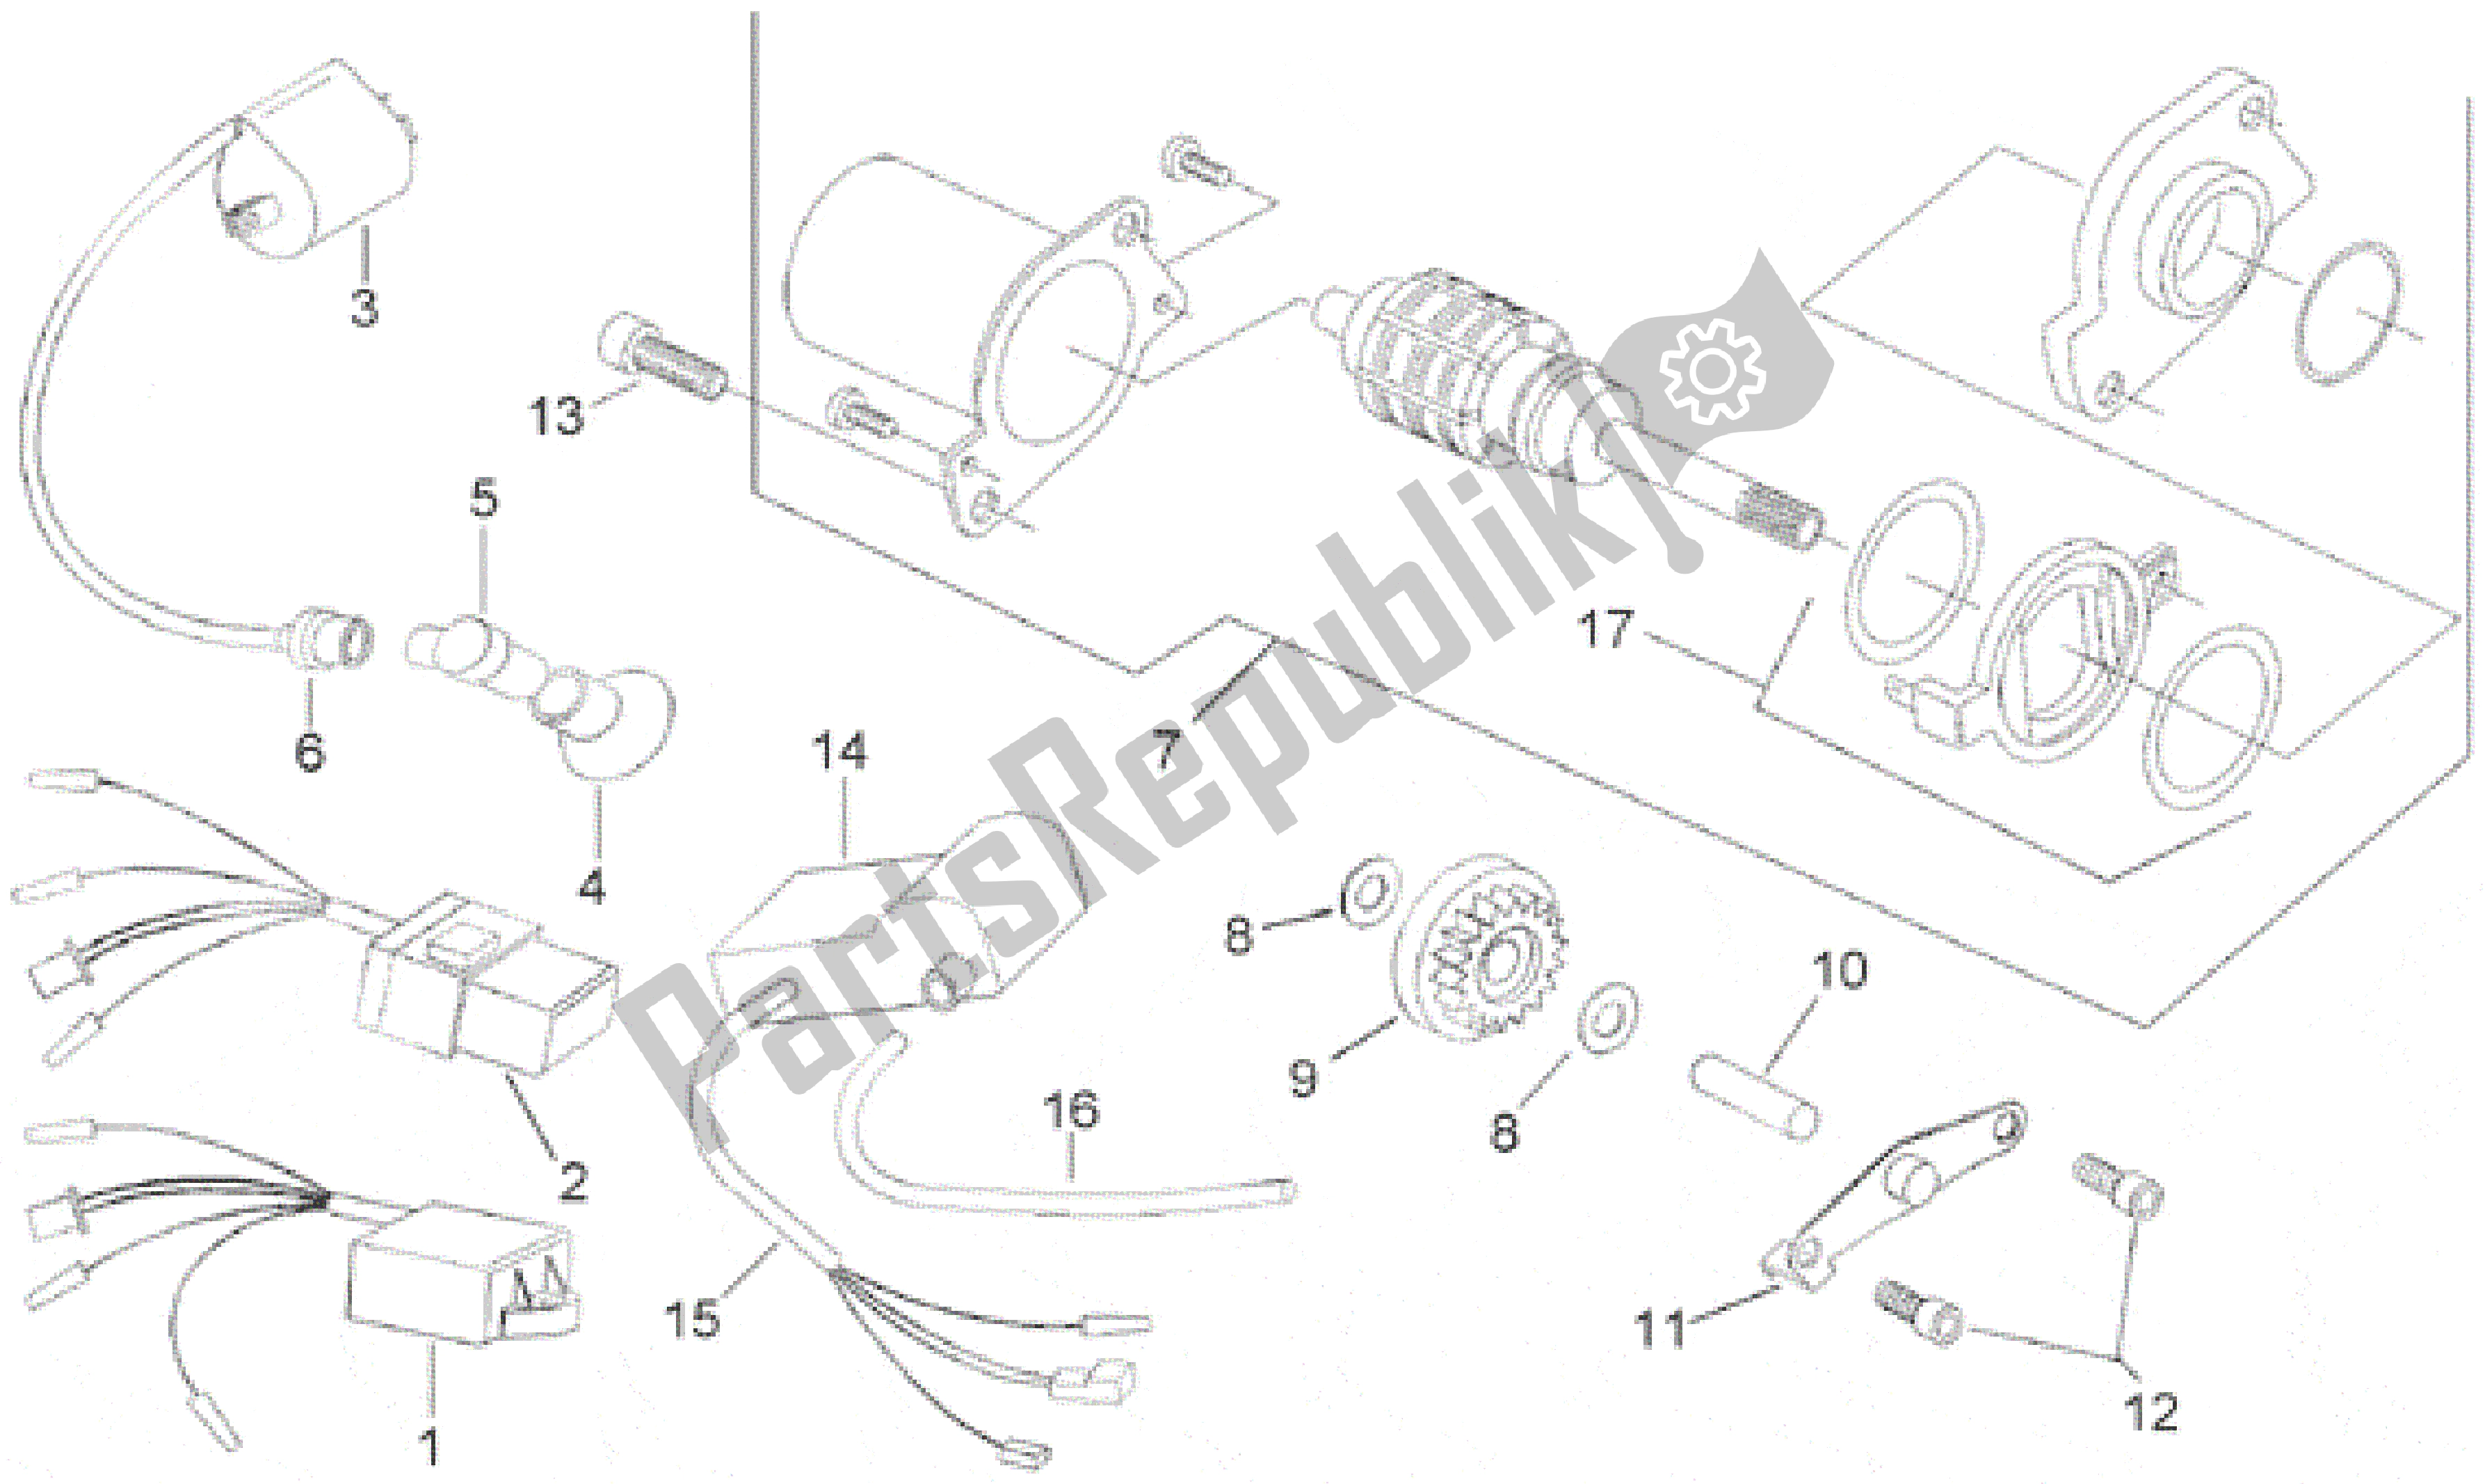 All parts for the Ignition Unit of the Aprilia Scarabeo 50 1993 - 1997